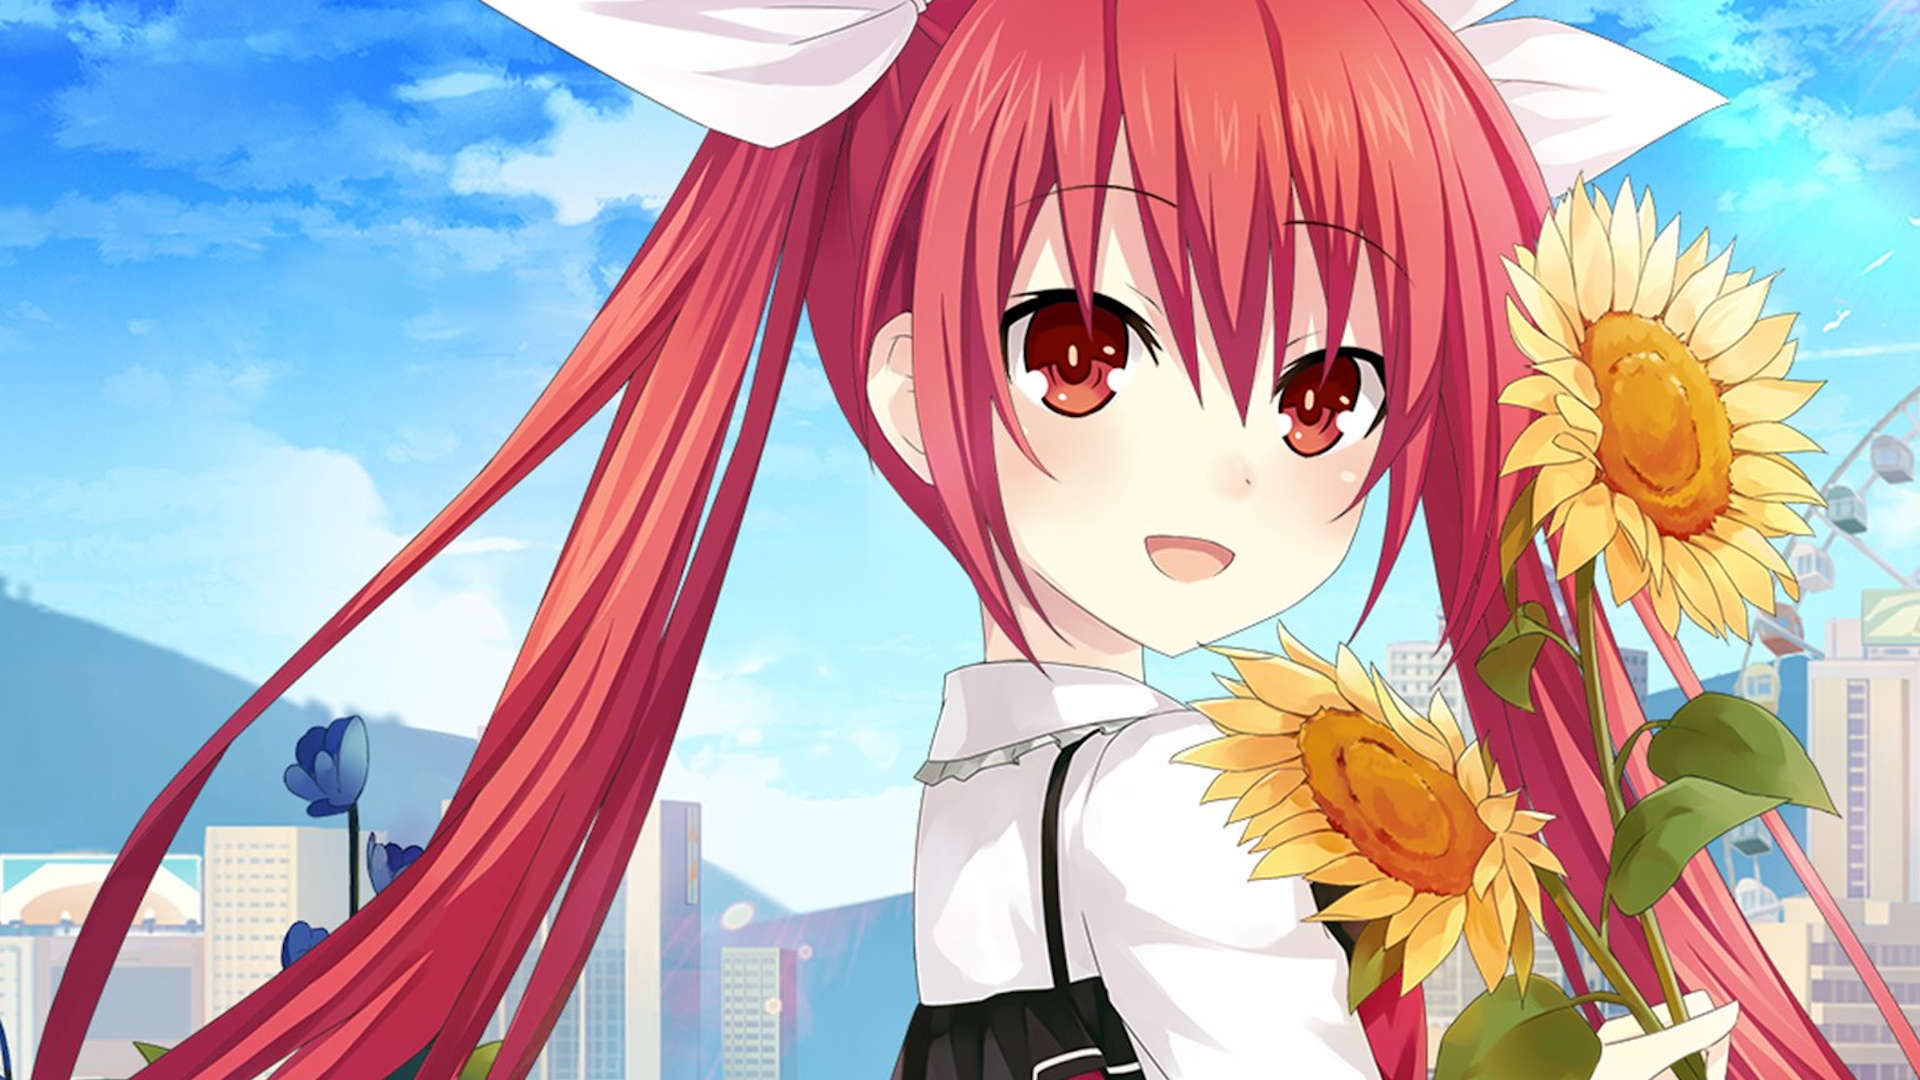 Date A Live: Spirit Pledge HD codes – coupons, cosmetics, and more